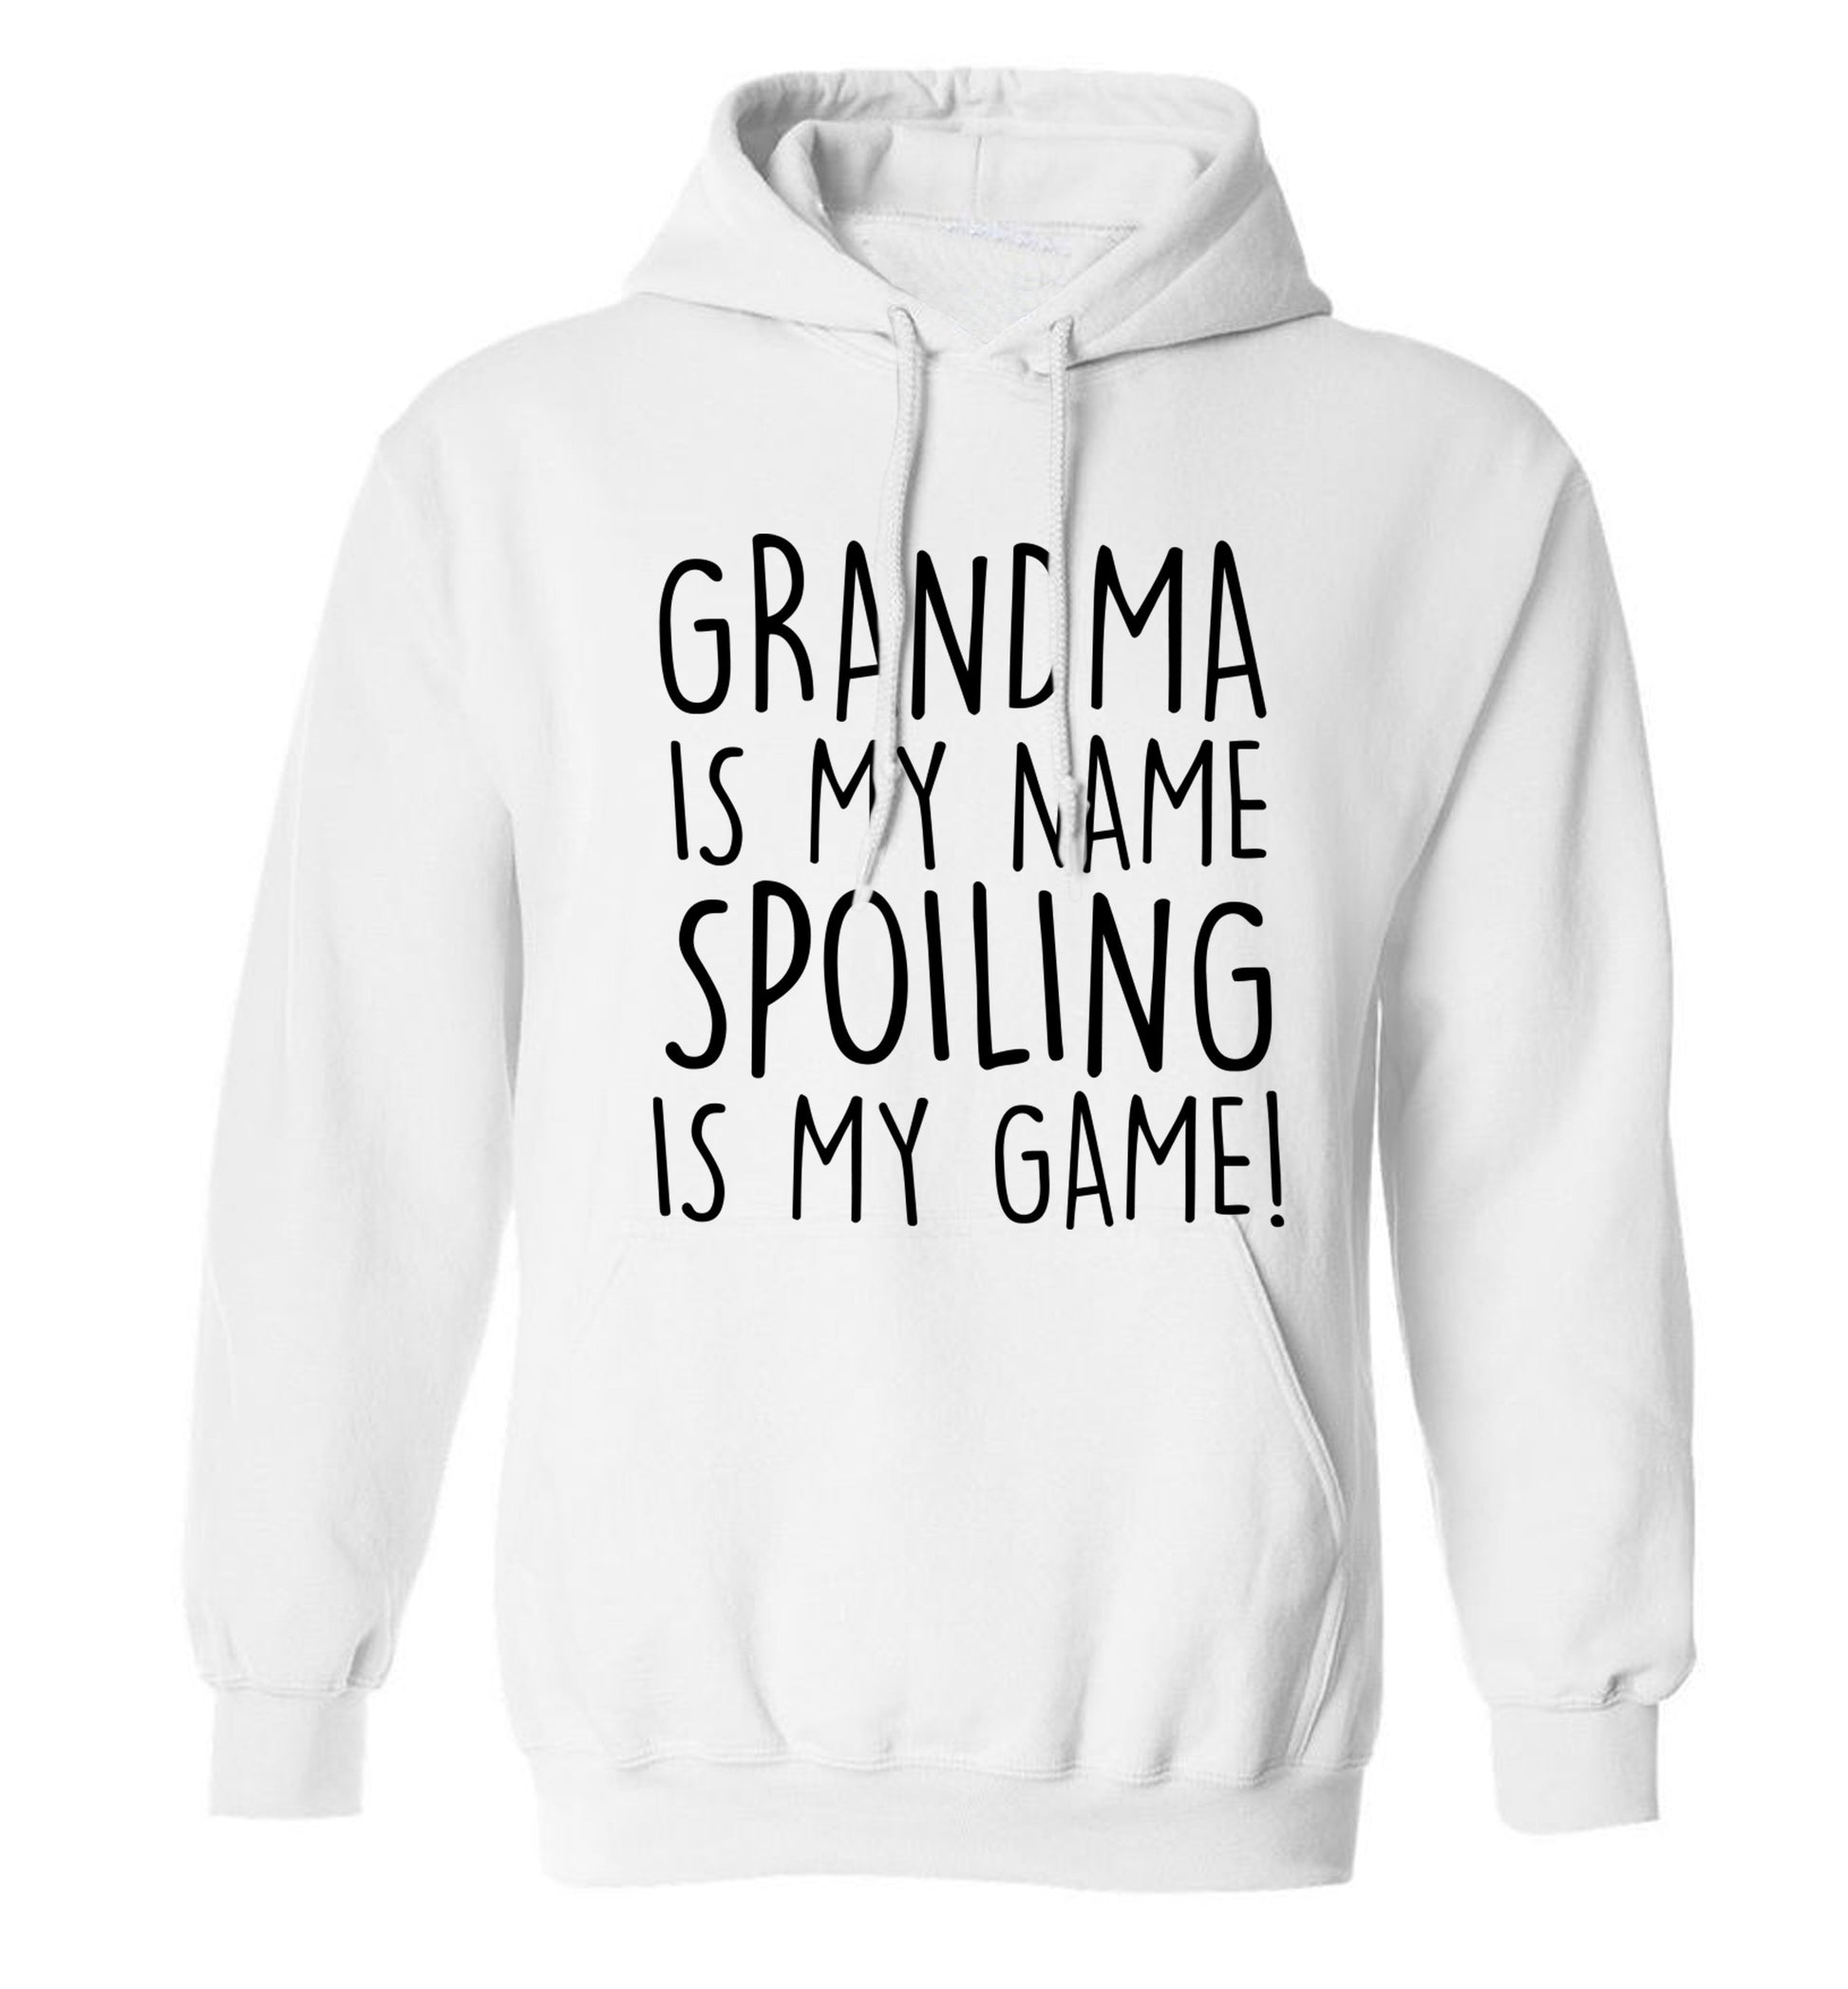 Grandma is my name, spoiling is my game adults unisex white hoodie 2XL